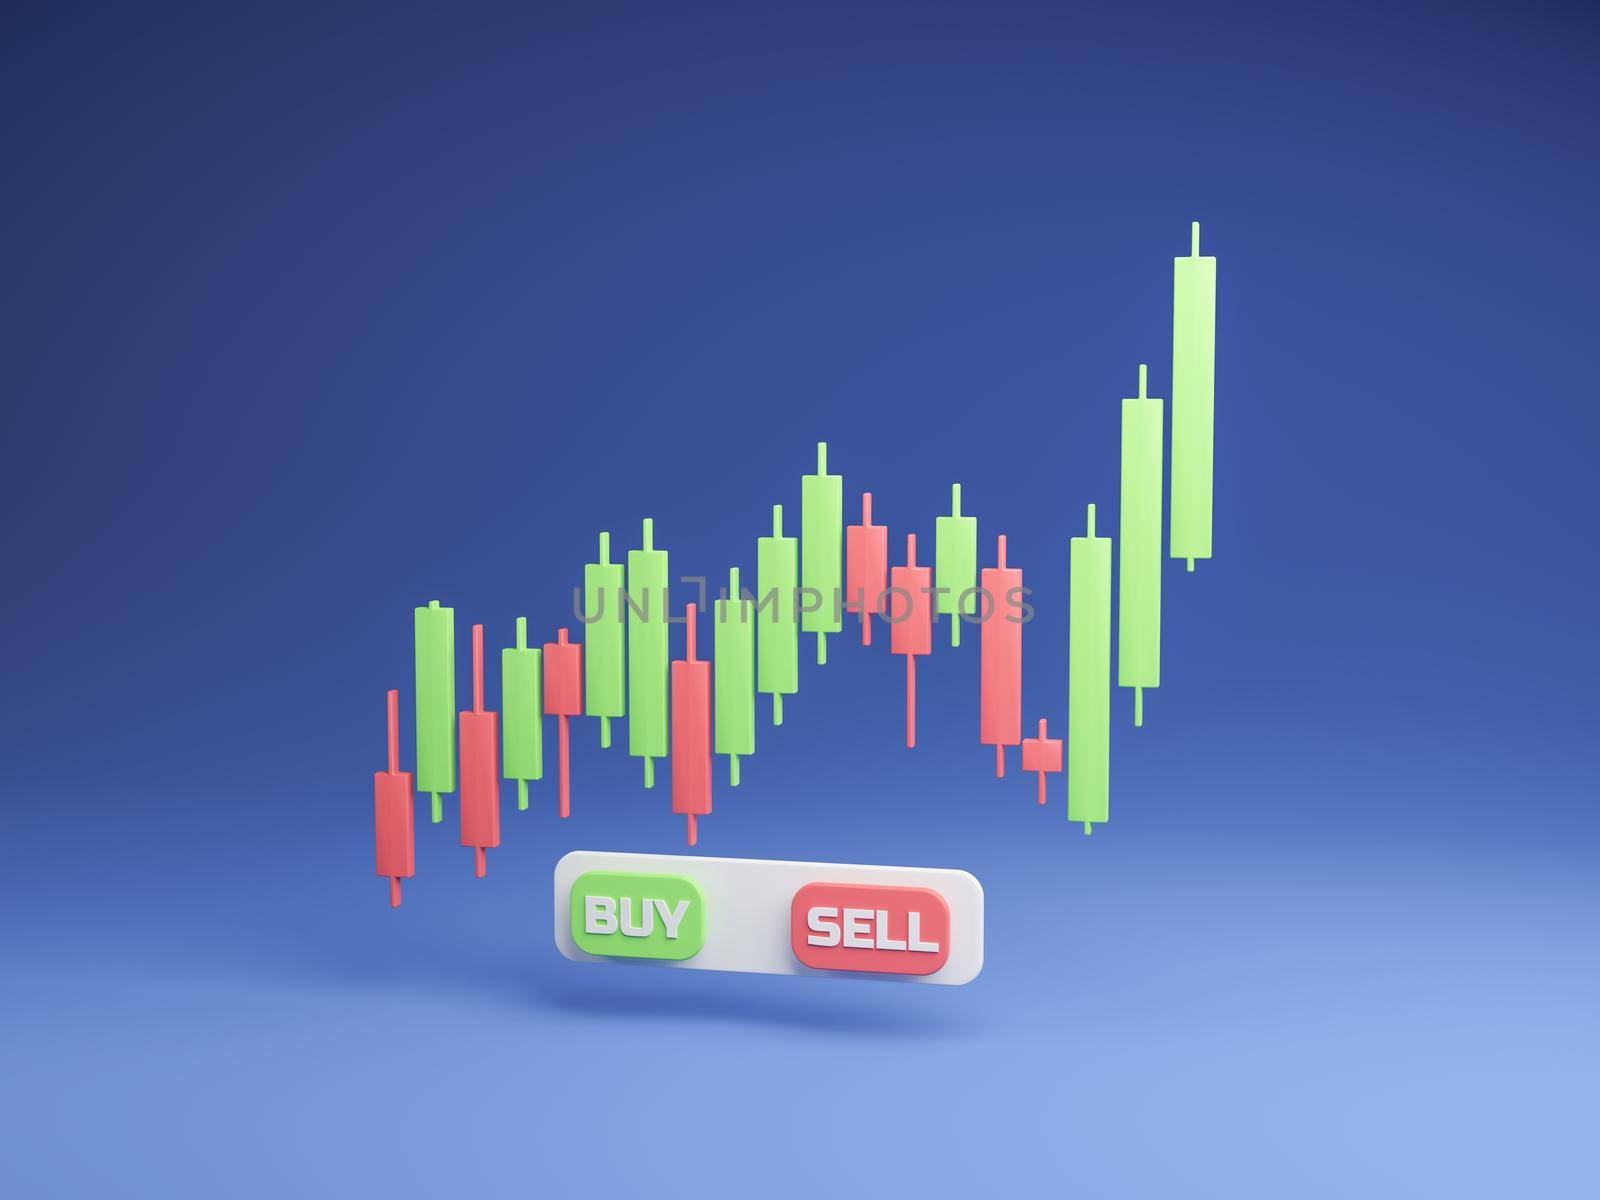 rising candlestick chart with buy and sell buttons by asolano